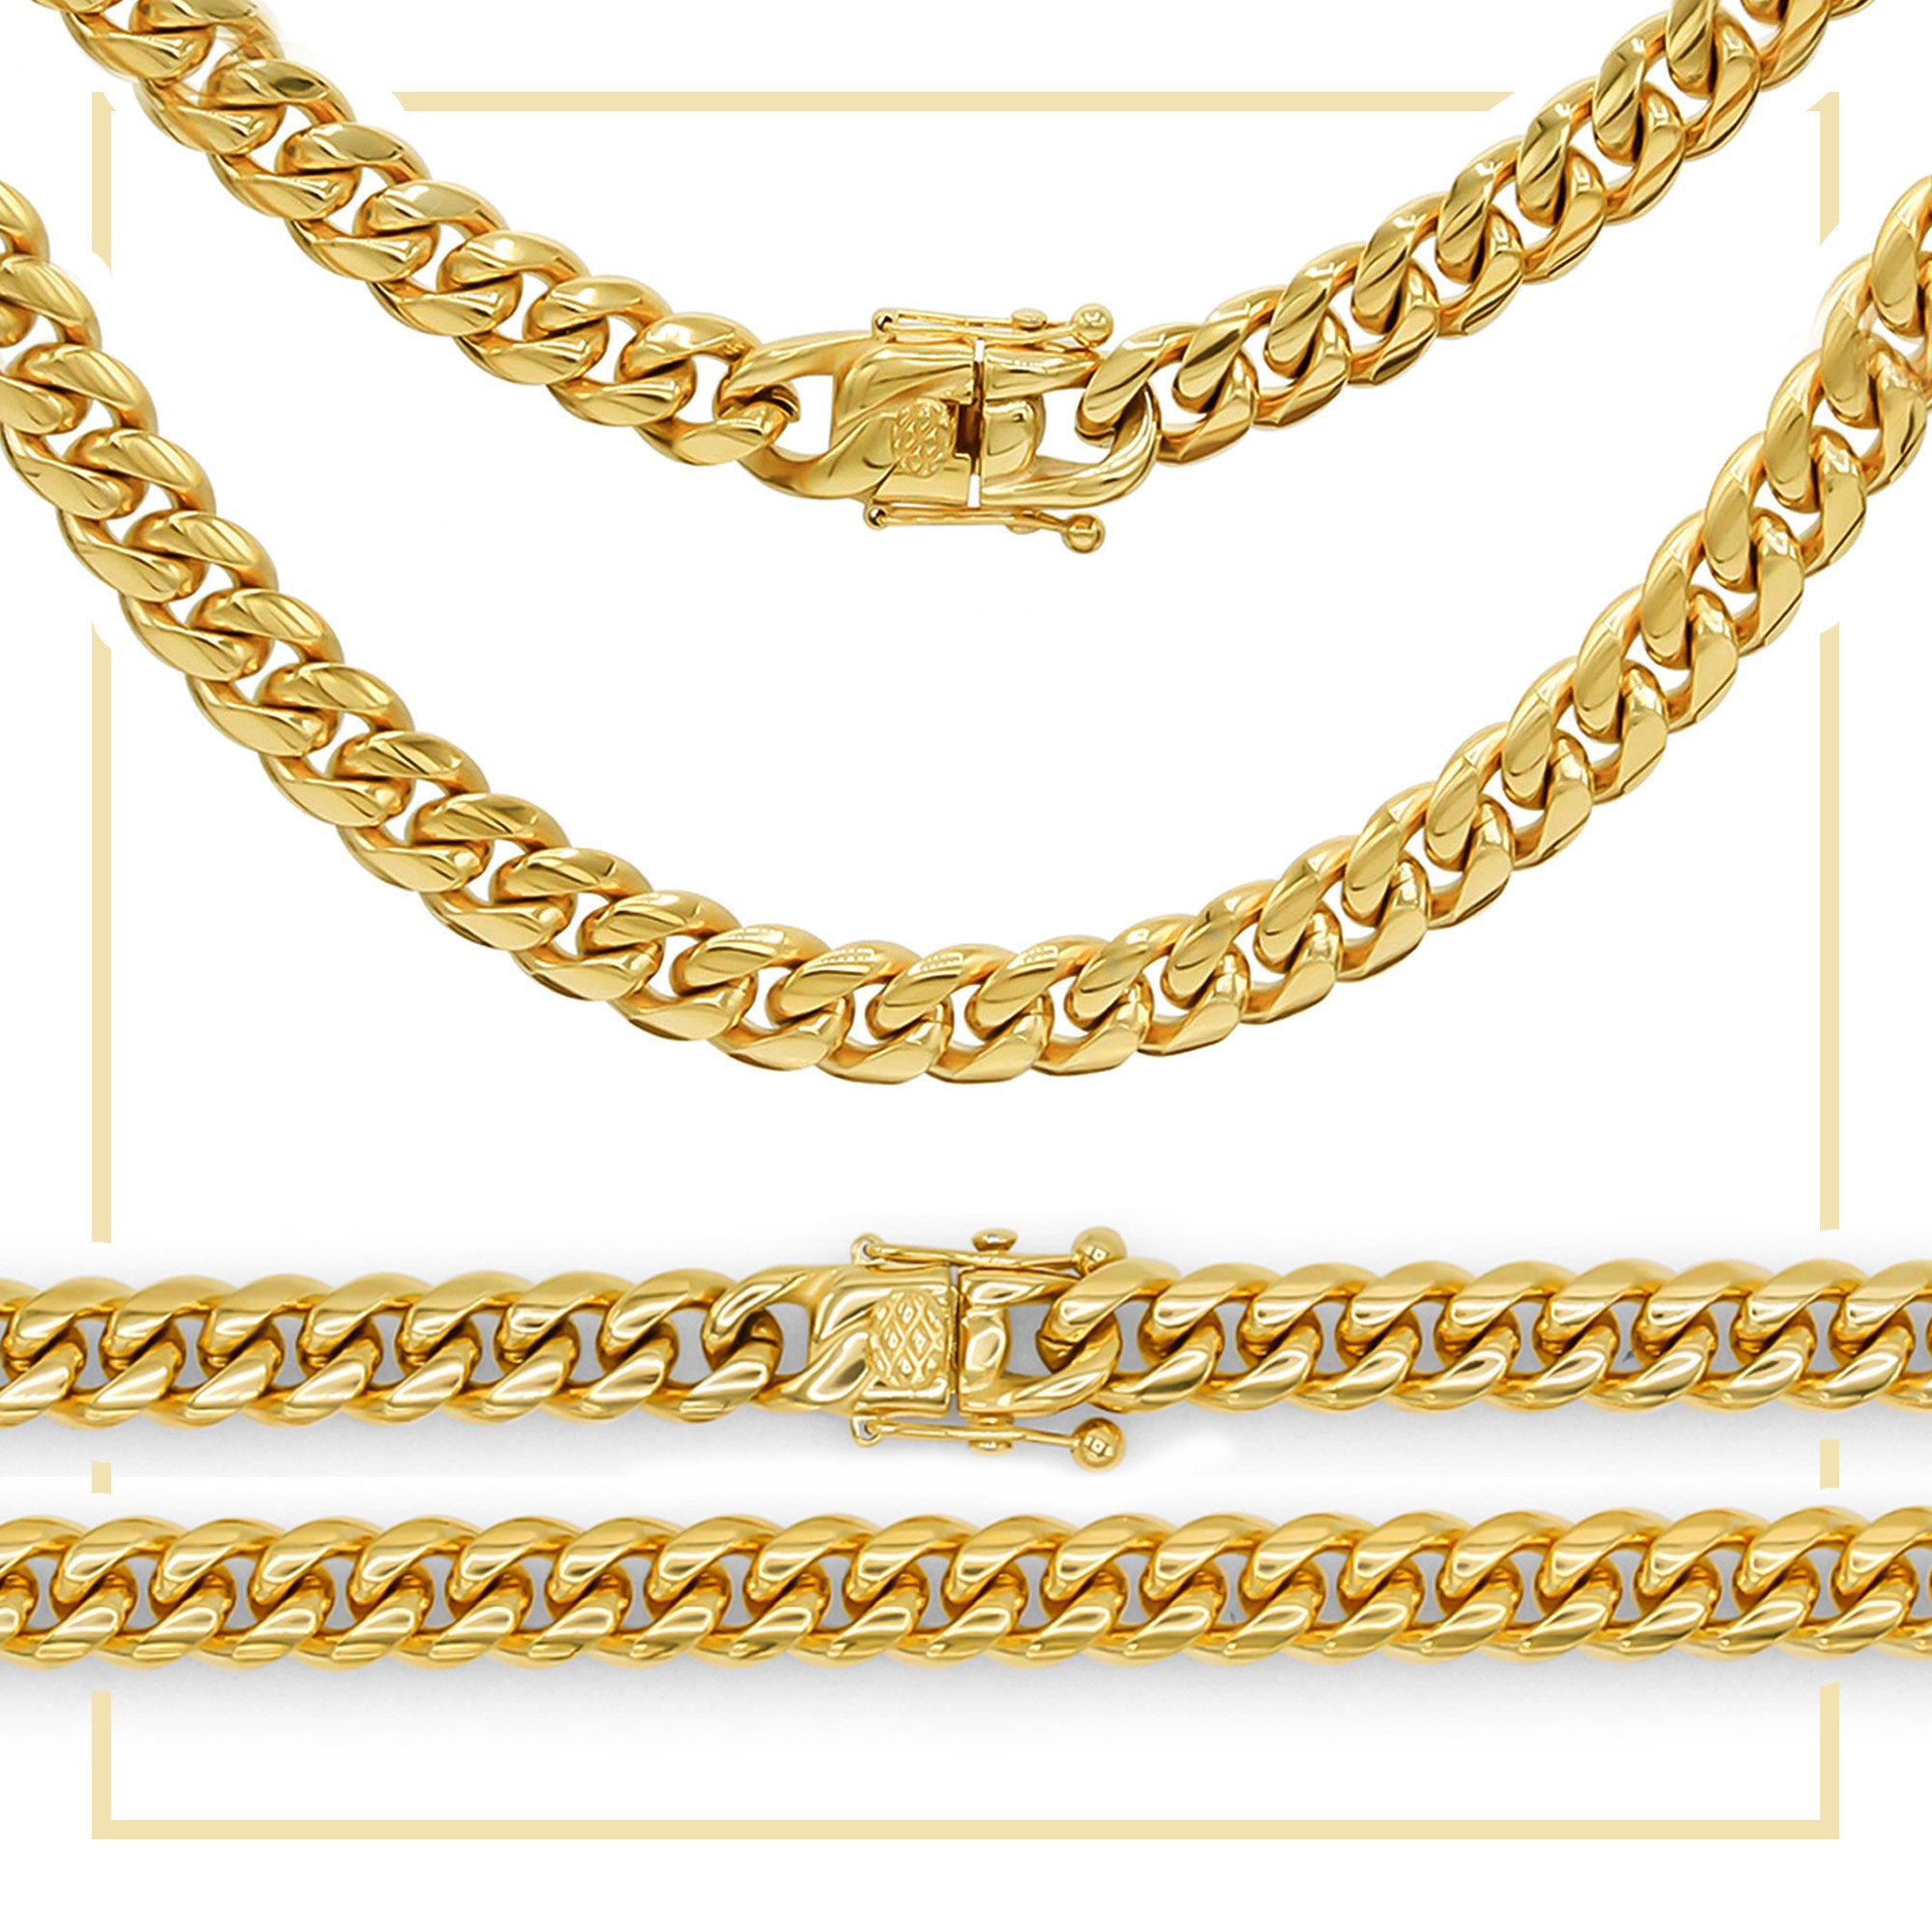 Men's Fashion: 5 Gold-Plated Chains You Must Buy - Inox Jewelry India